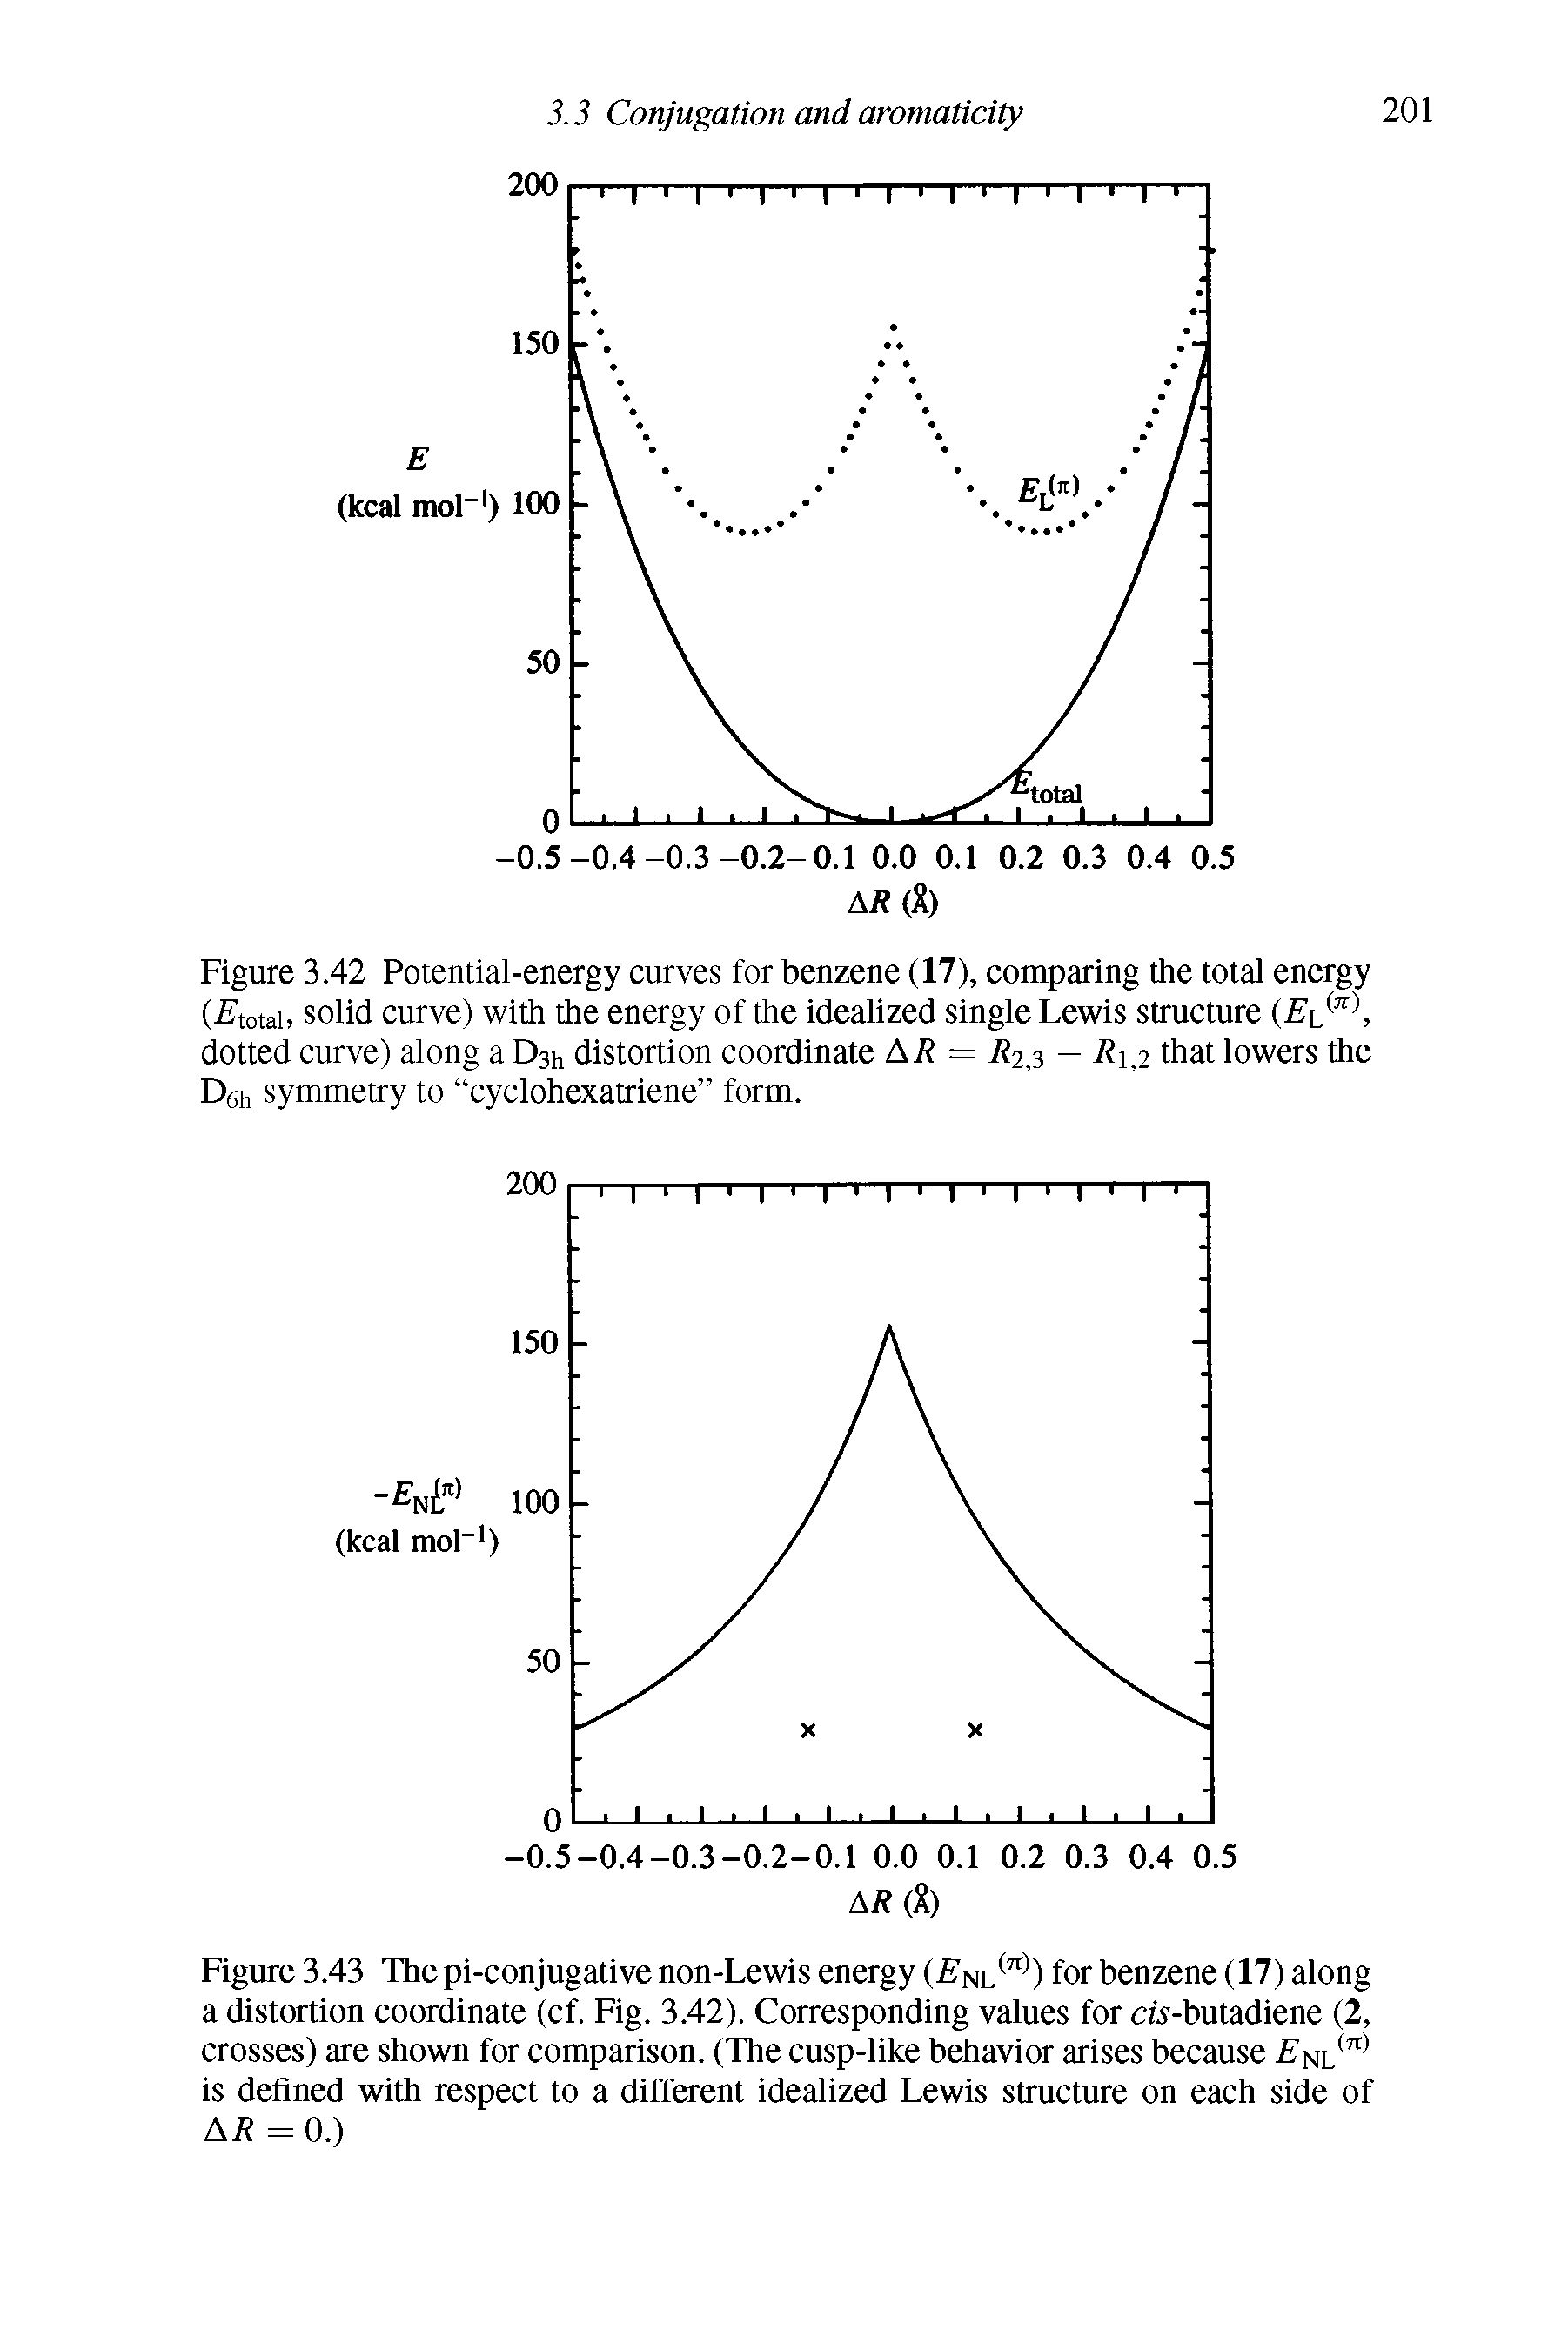 Figure 3.42 Potential-energy curves for benzene (17), comparing the total energy (-Etotai, solid curve) with the energy of the idealized single Lewis structure dotted curve) along a D3h distortion coordinate AR = R2,3 — R i that lowers the D6h symmetry to cyclohexatriene form.